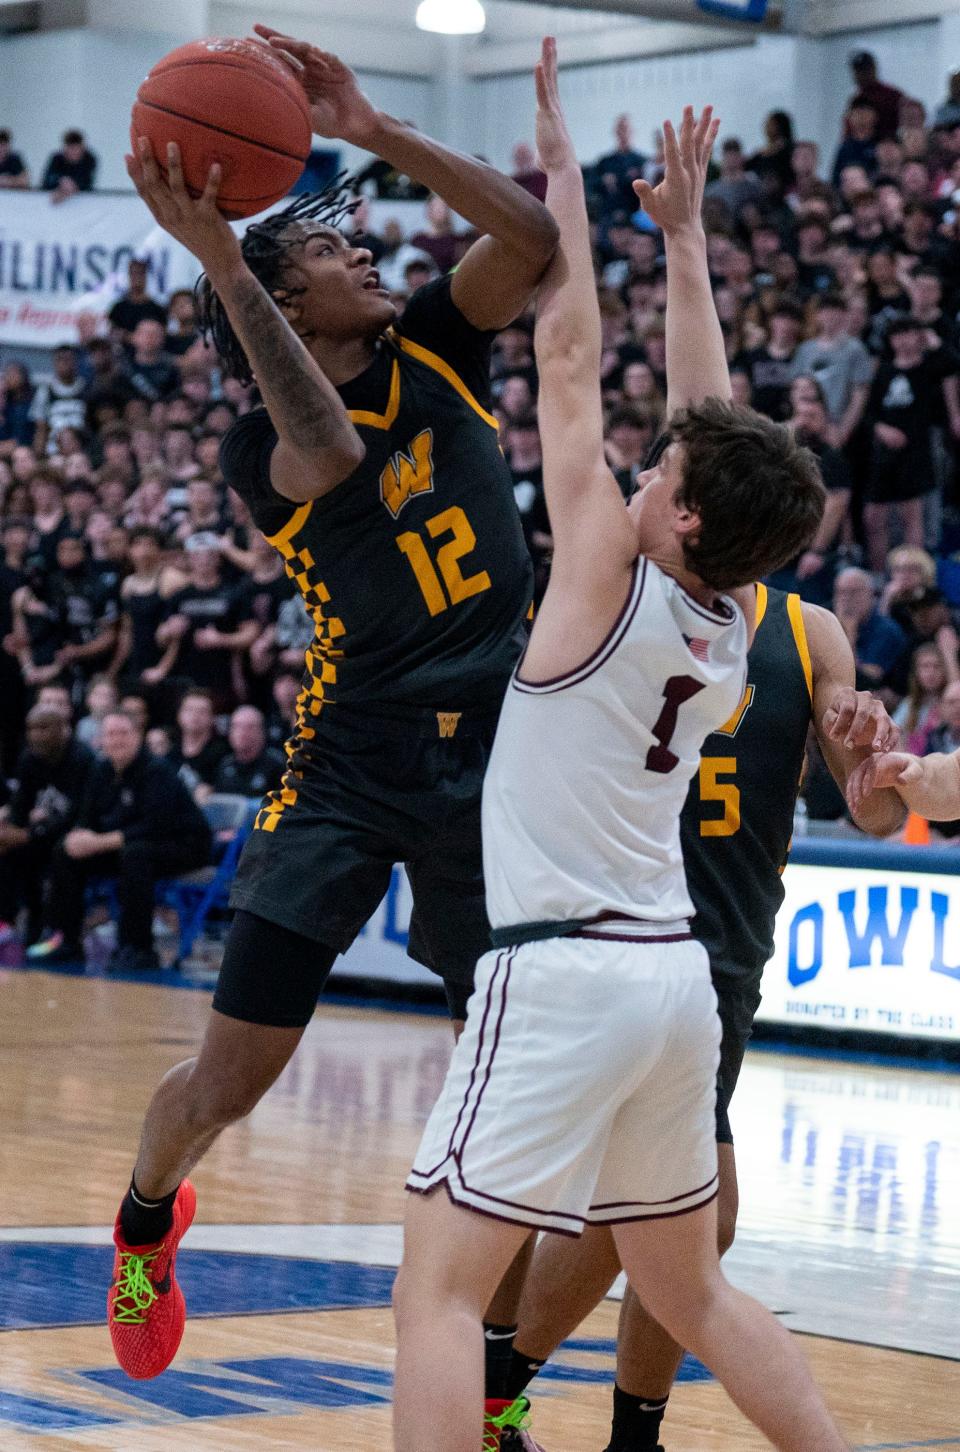 Archbishop Wood's Tahir Howell (12) shoots inside against Lower Merion's Gus Wright on Wednesday.